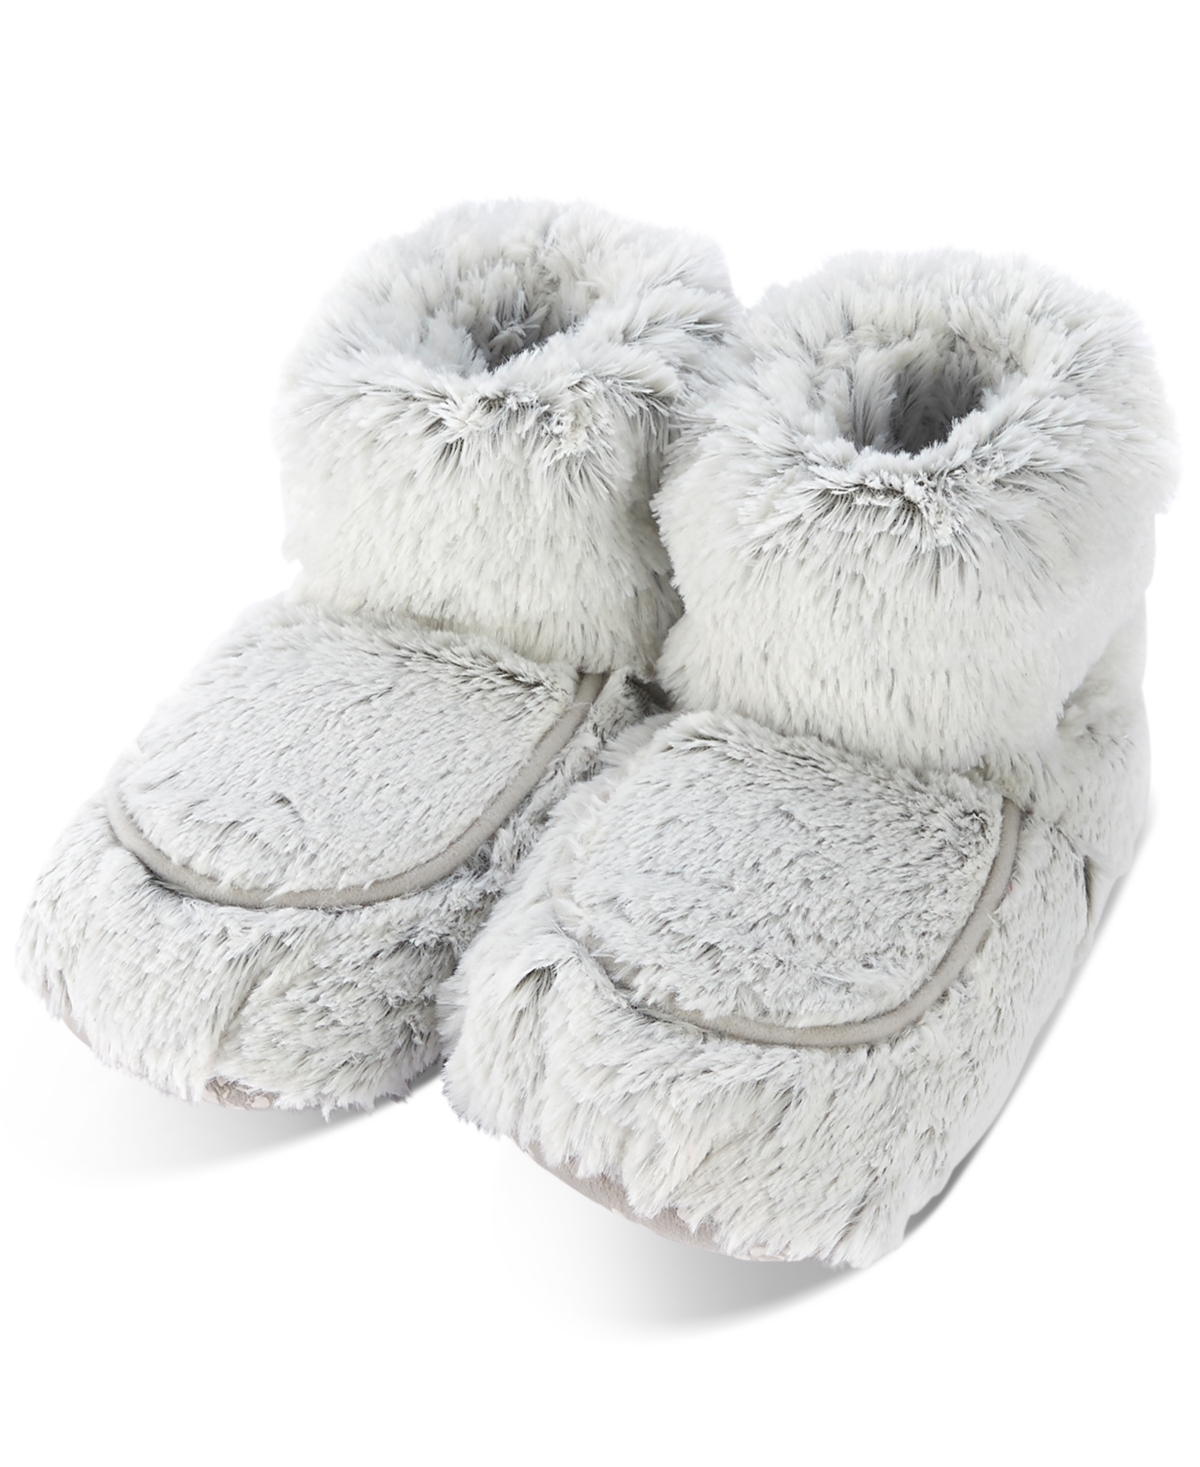 Warmies Women's Marshmallow Booties (3 Colors) $8.75 at Macy's w/ Free Store Pickup